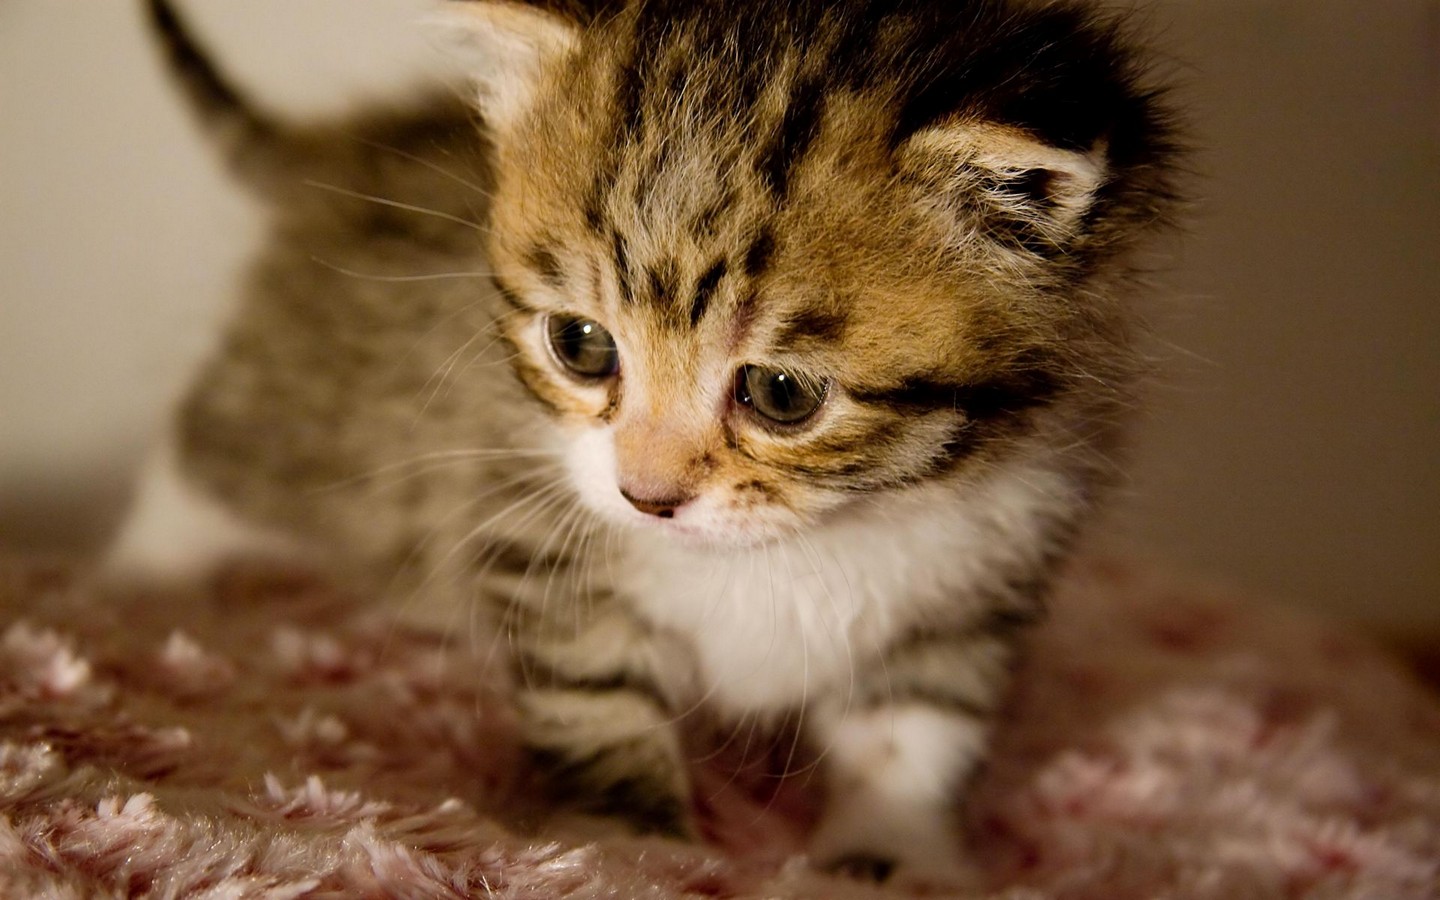 Cute Kittens Pictures The Wondrous Pics